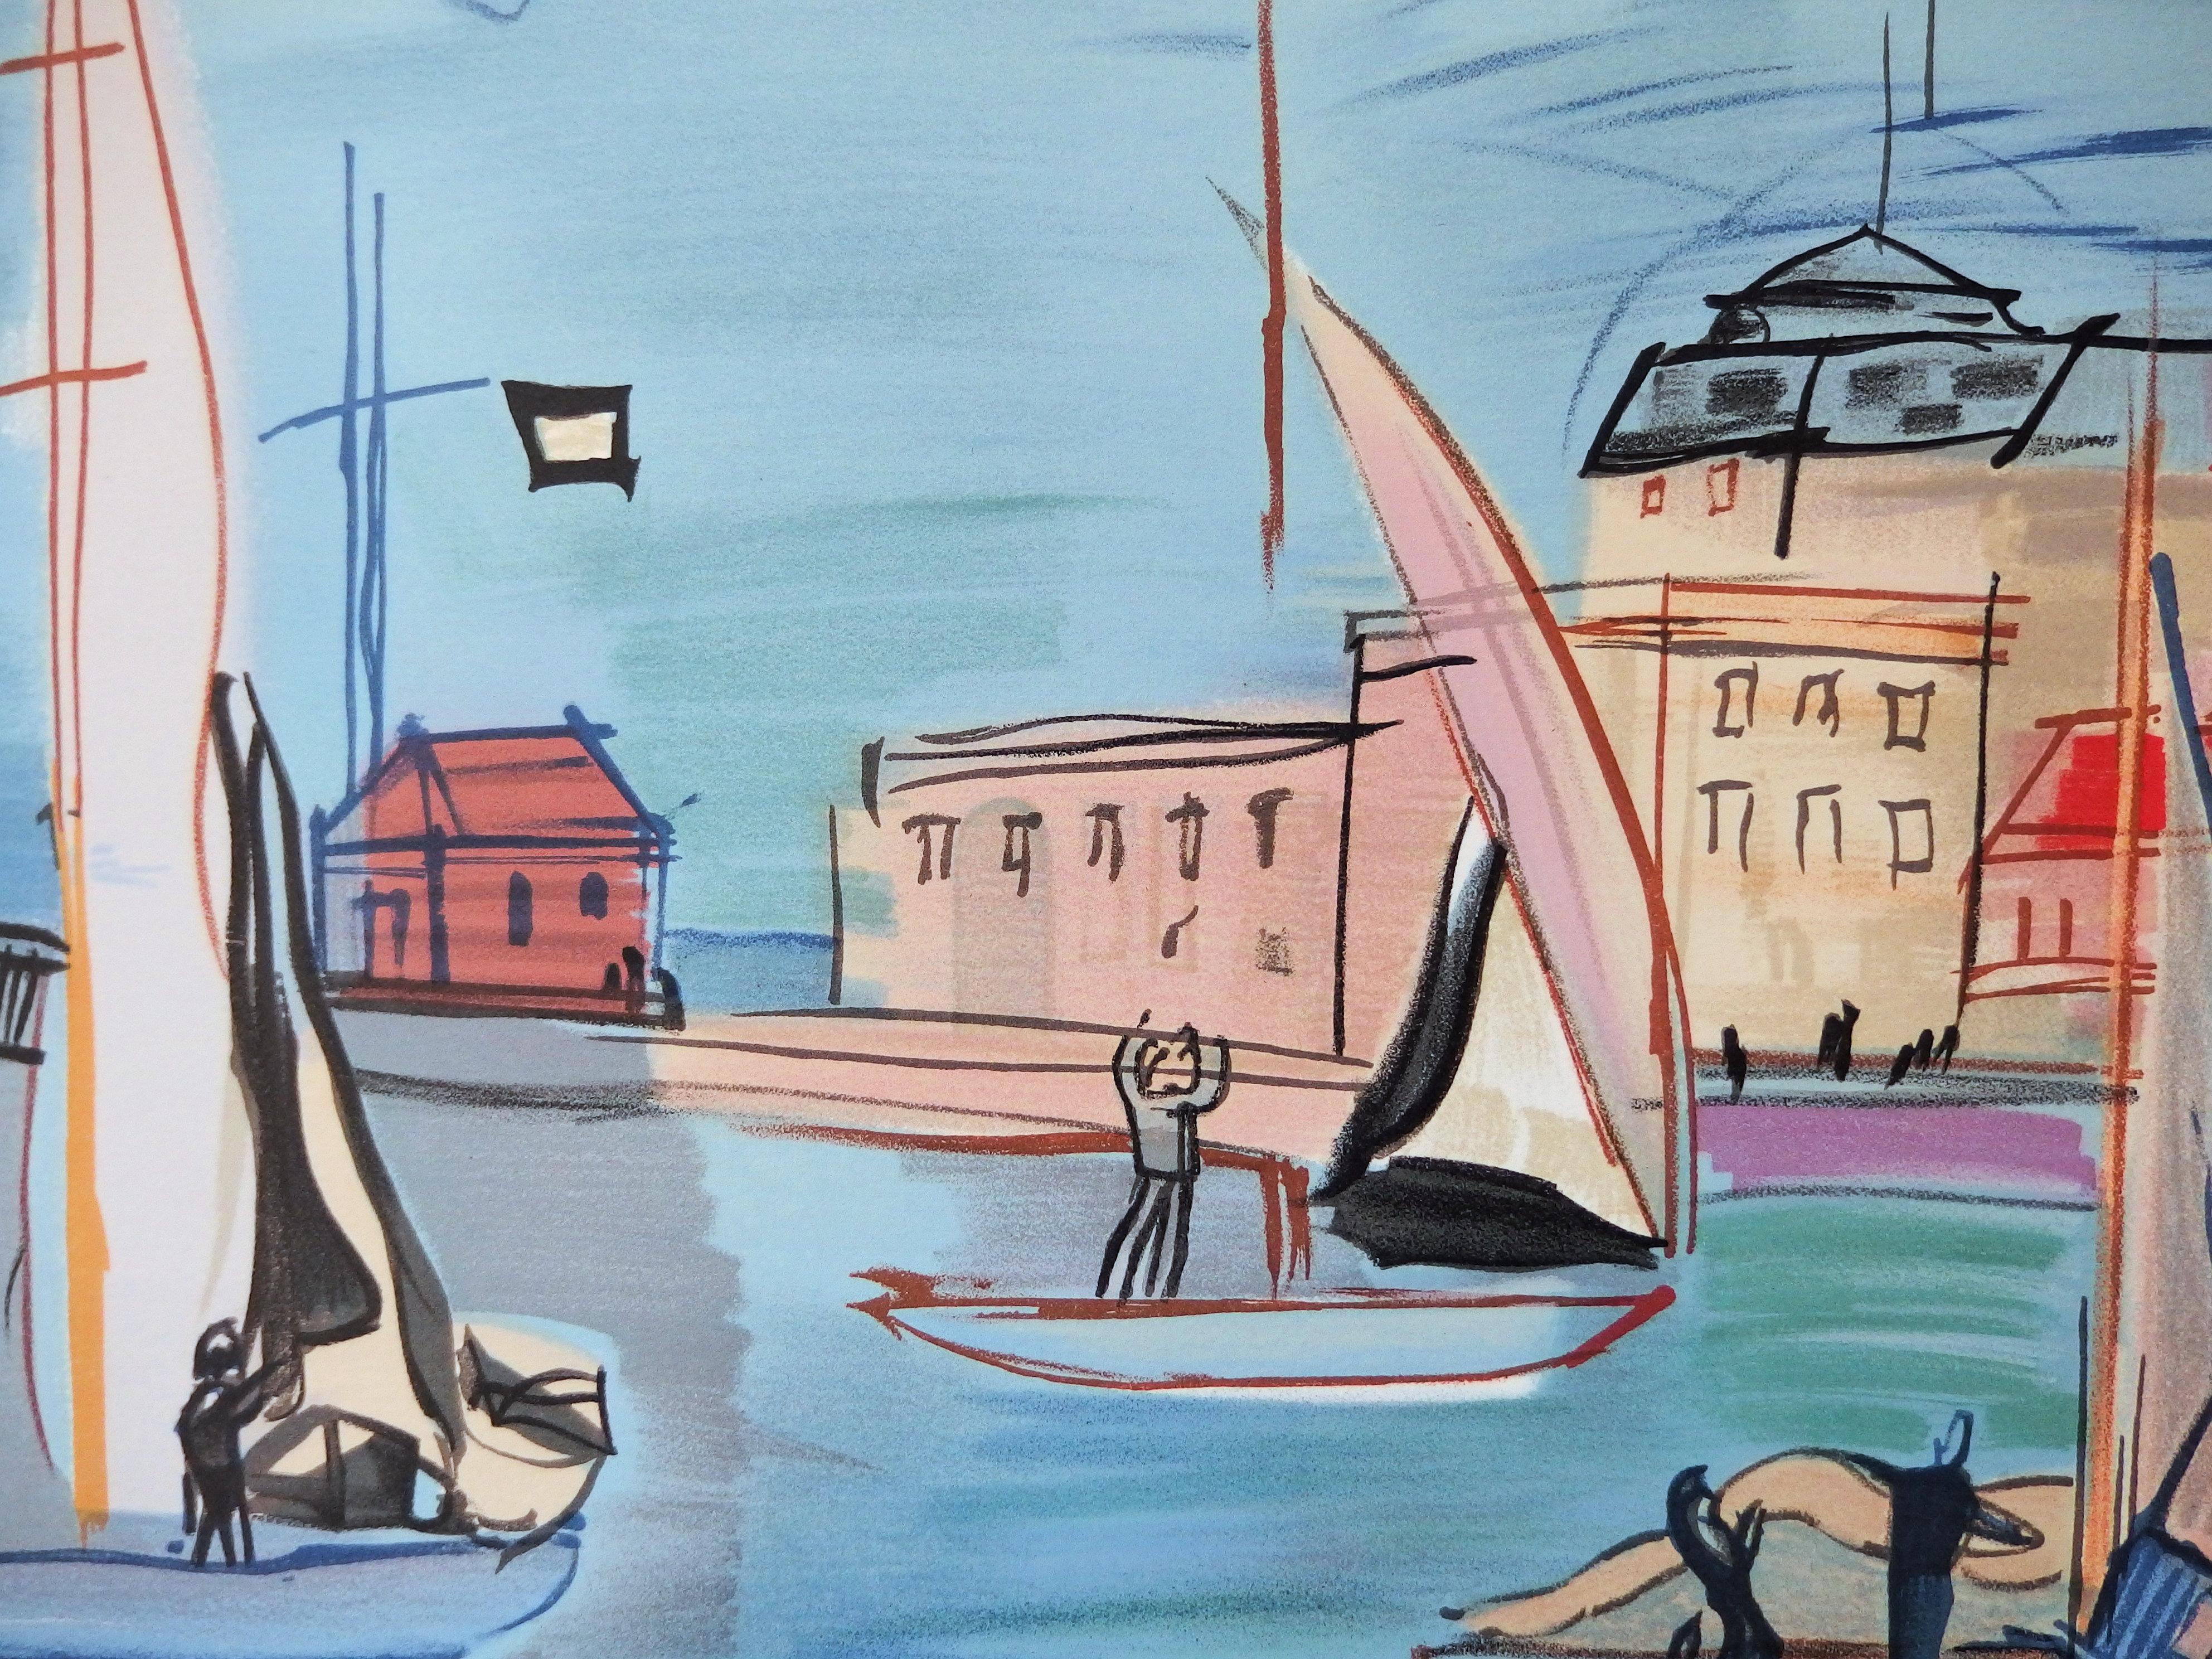 Sailboats - Lithograph (Mourlot) - Modern Print by (after) Raoul Dufy